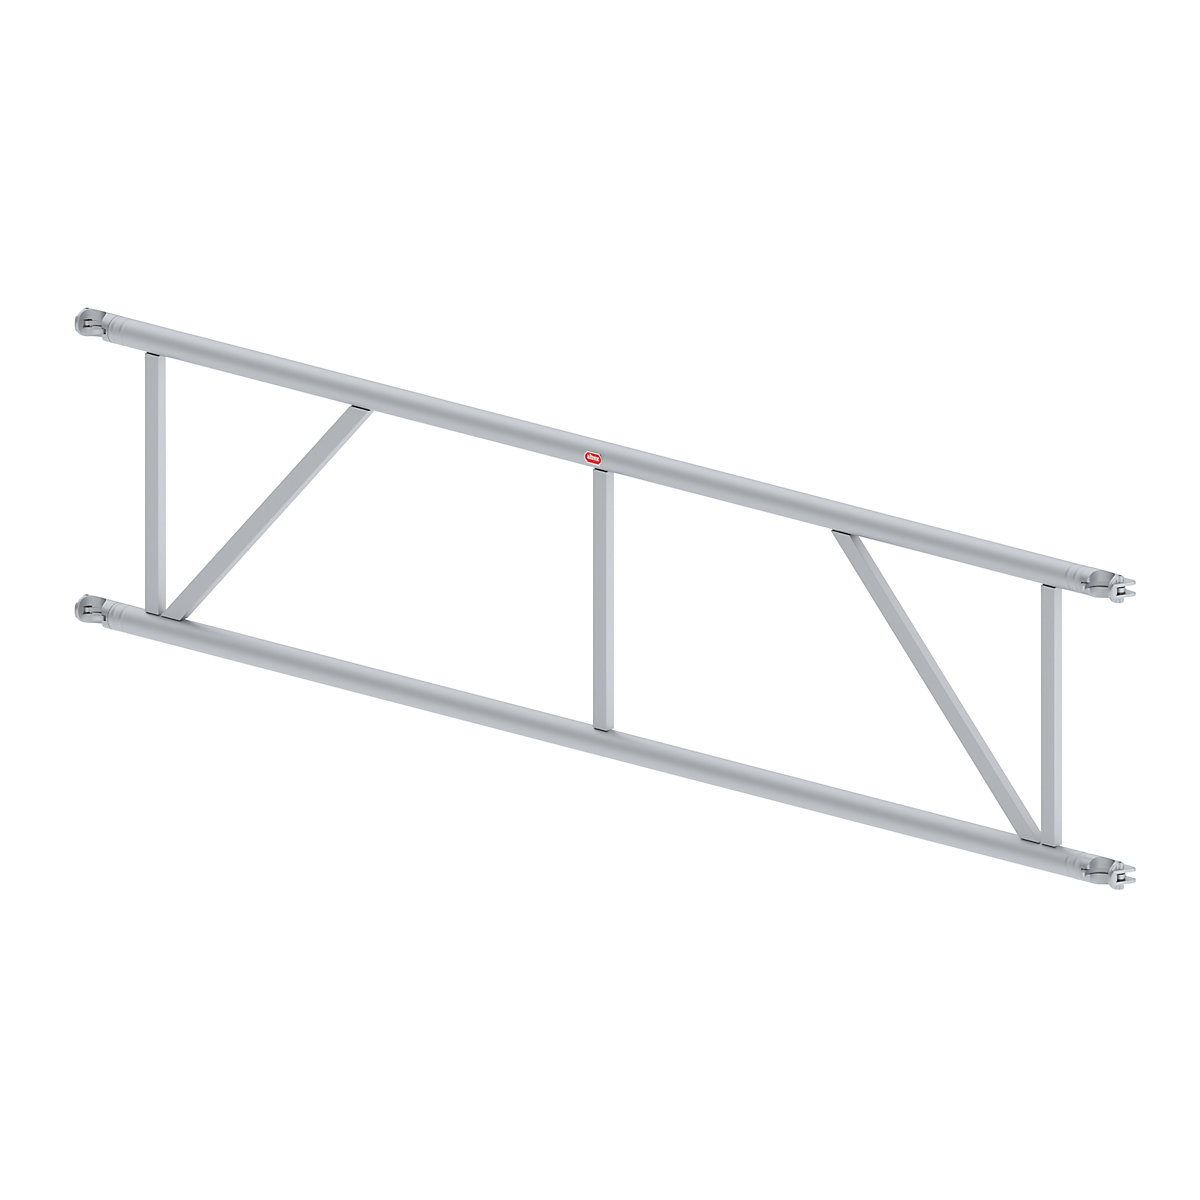 Double guardrail strut – Altrex, for RS TOWER 5 series mobile access towers, for width 2.45 m-2